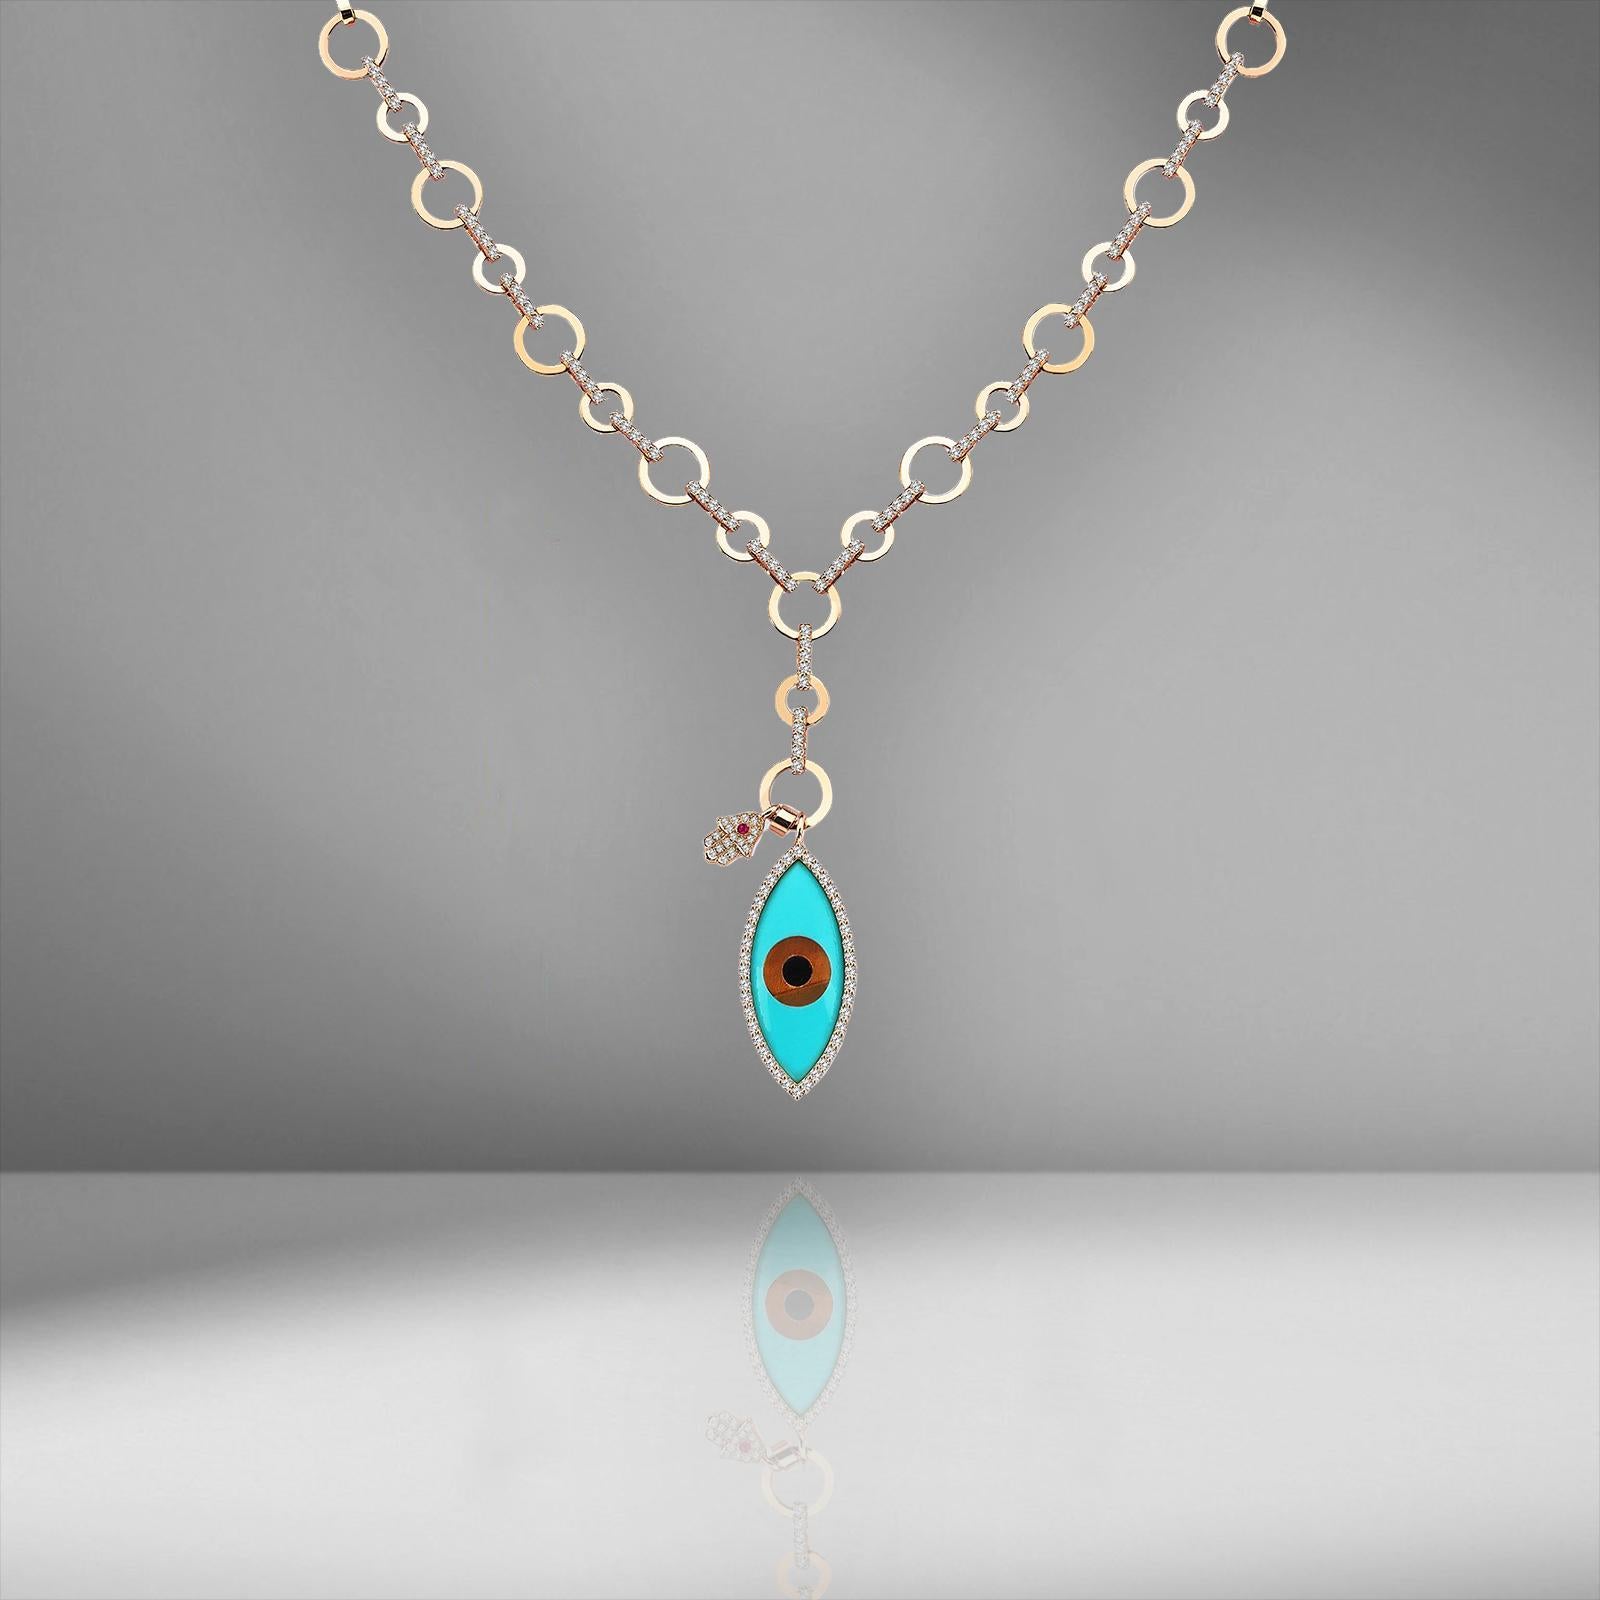 Turquoise Evil Eye Protections Charm With Mini Hamsa Hand Pave Diamonds 18K Rose Gold Necklace Is Sure To Be An Eye-Catcher. 
Wear It On Its Own Or Layered With Any Of Our Other Delicate Charms.

18K Rose Gold
Total Diamond Weight: 1.25 ct Diamond;